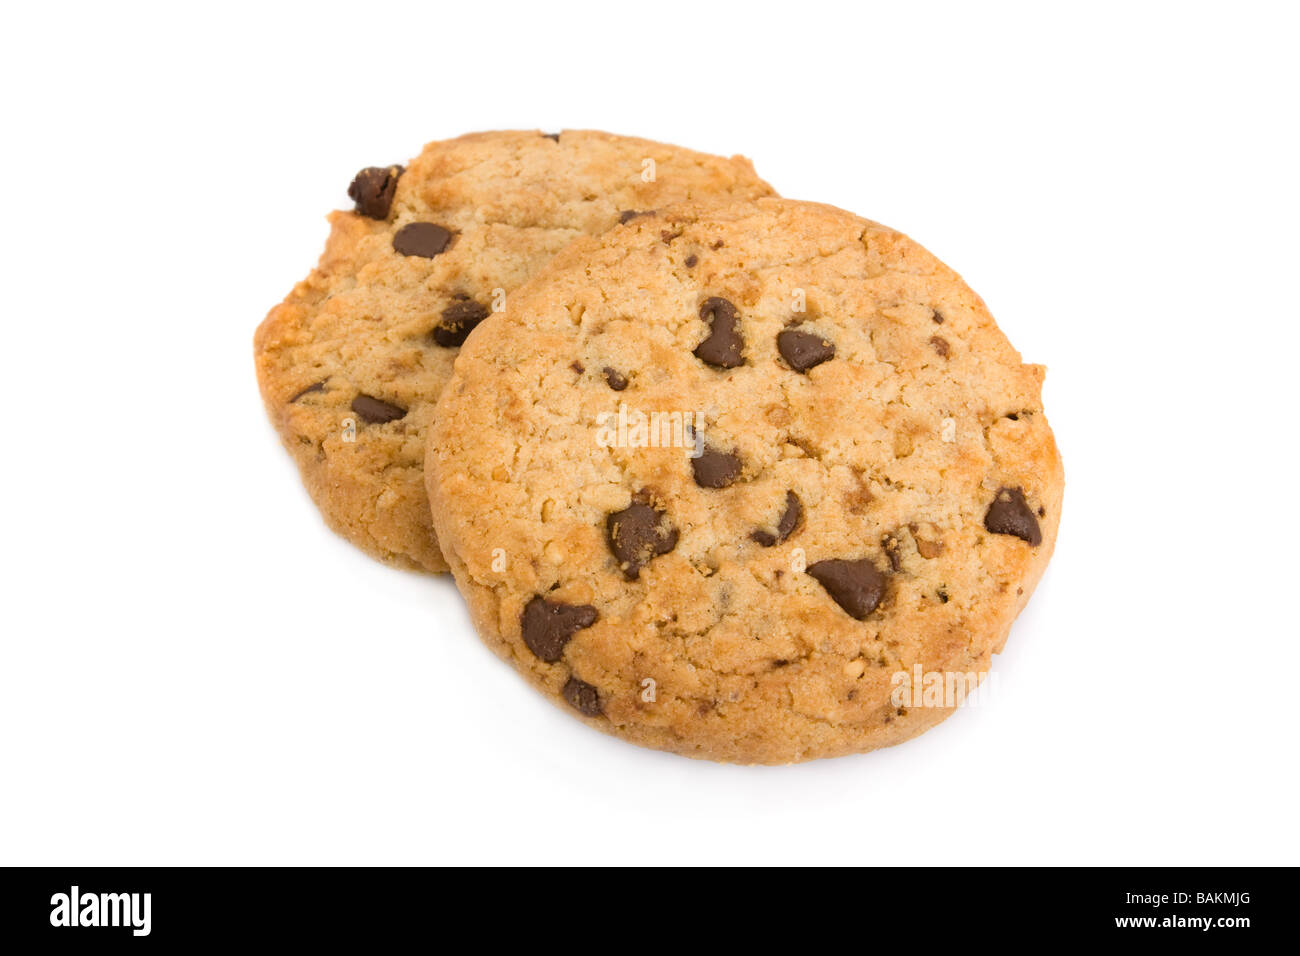 Pile of chocolate chip cookies isolated on white background. cut out cutout biscuit biscuits cookie sweet snack food Stock Photo